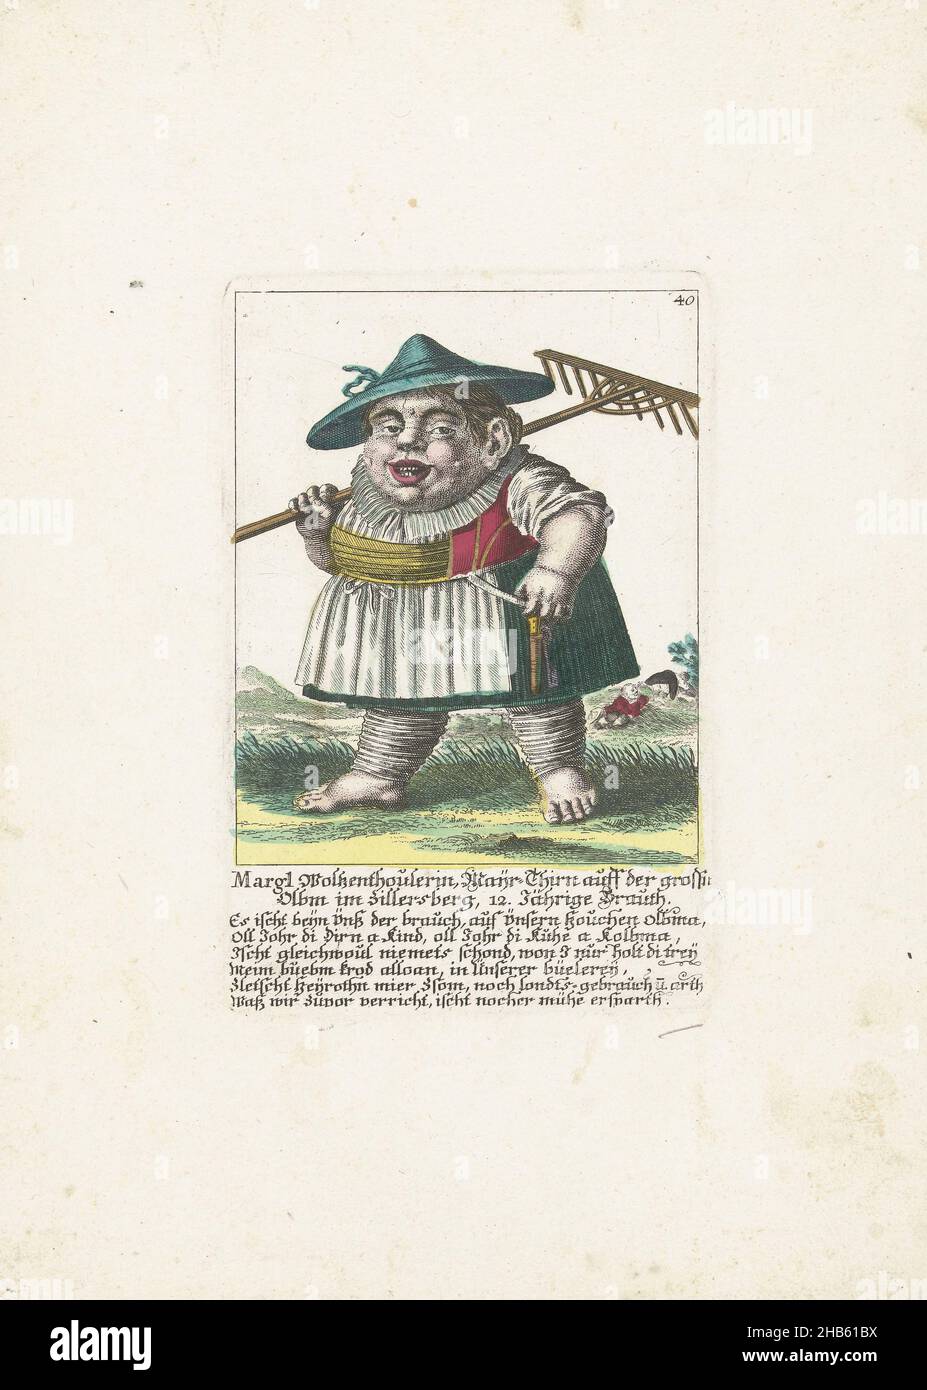 The dwarf Margl Woltzenthoulerin, c. 1710, Margl Woltzenthoulerin, Mayr-Thirn auff der grossn Olbm im Zillersberg, 12. Jährige Brauth (title on object), Il Callotto resurcitato oder Neu eingerichtes Zwerchen Cabinet (series title), The dwarf Margl Woltzenthoulerin, farmer's wife and twelve-year-old bride with a rake on shoulder. In the caption below the title, a six-line verse in German. Numbered top right: 40. Part of a loose-leaf edition from c. 1710 of a series of caricatures featuring dwarfs, known as The Dwarf Stage., print maker: Martin Engelbrecht (attributed to), Augsburg, 1705 - 1715 Stock Photo